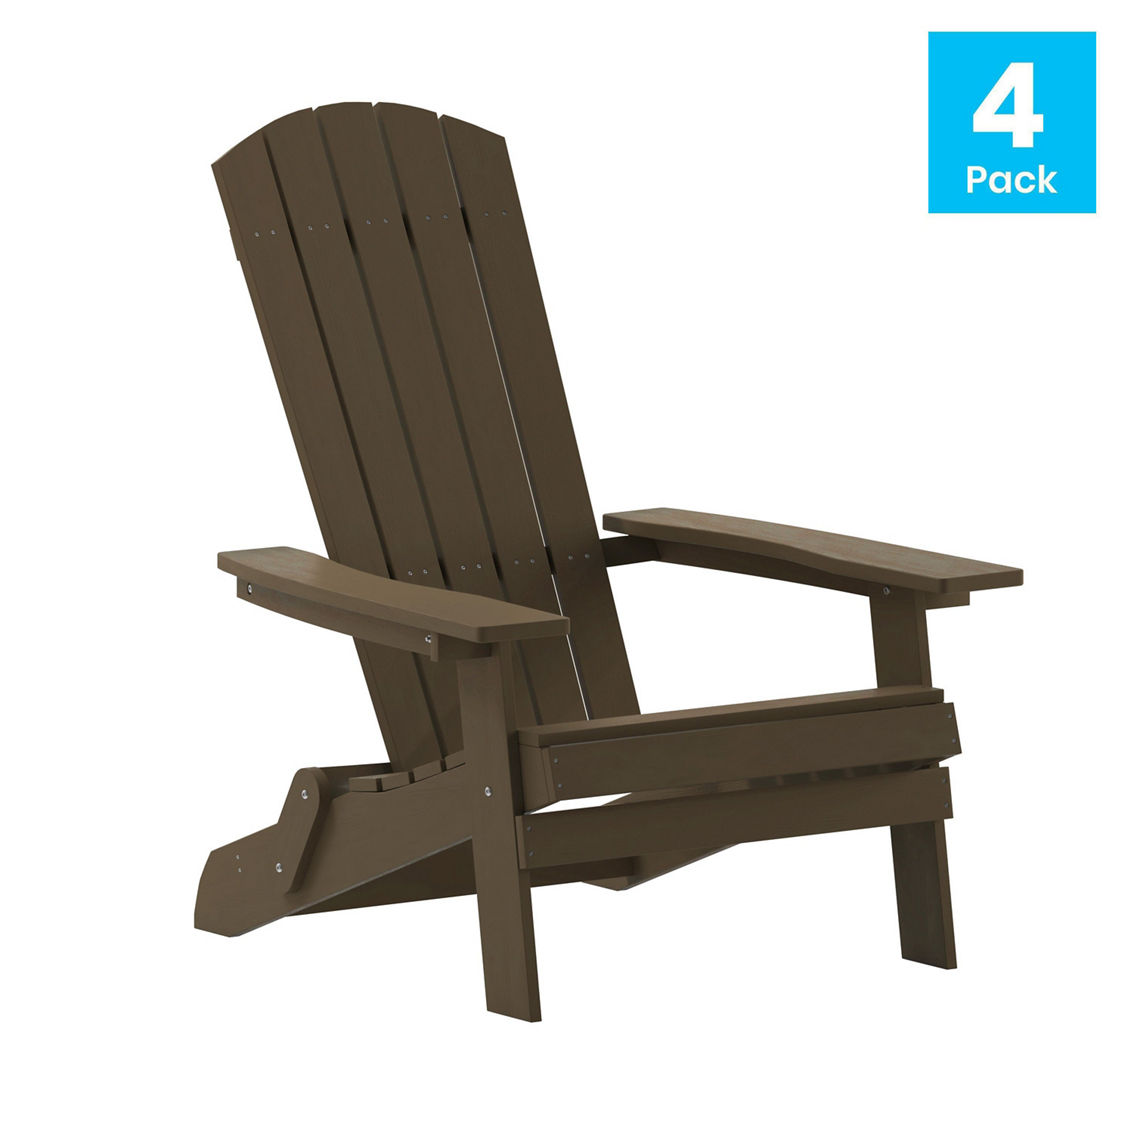 Flash Furniture 4 Pack All-Weather Folding Adirondack Chairs - Image 4 of 5